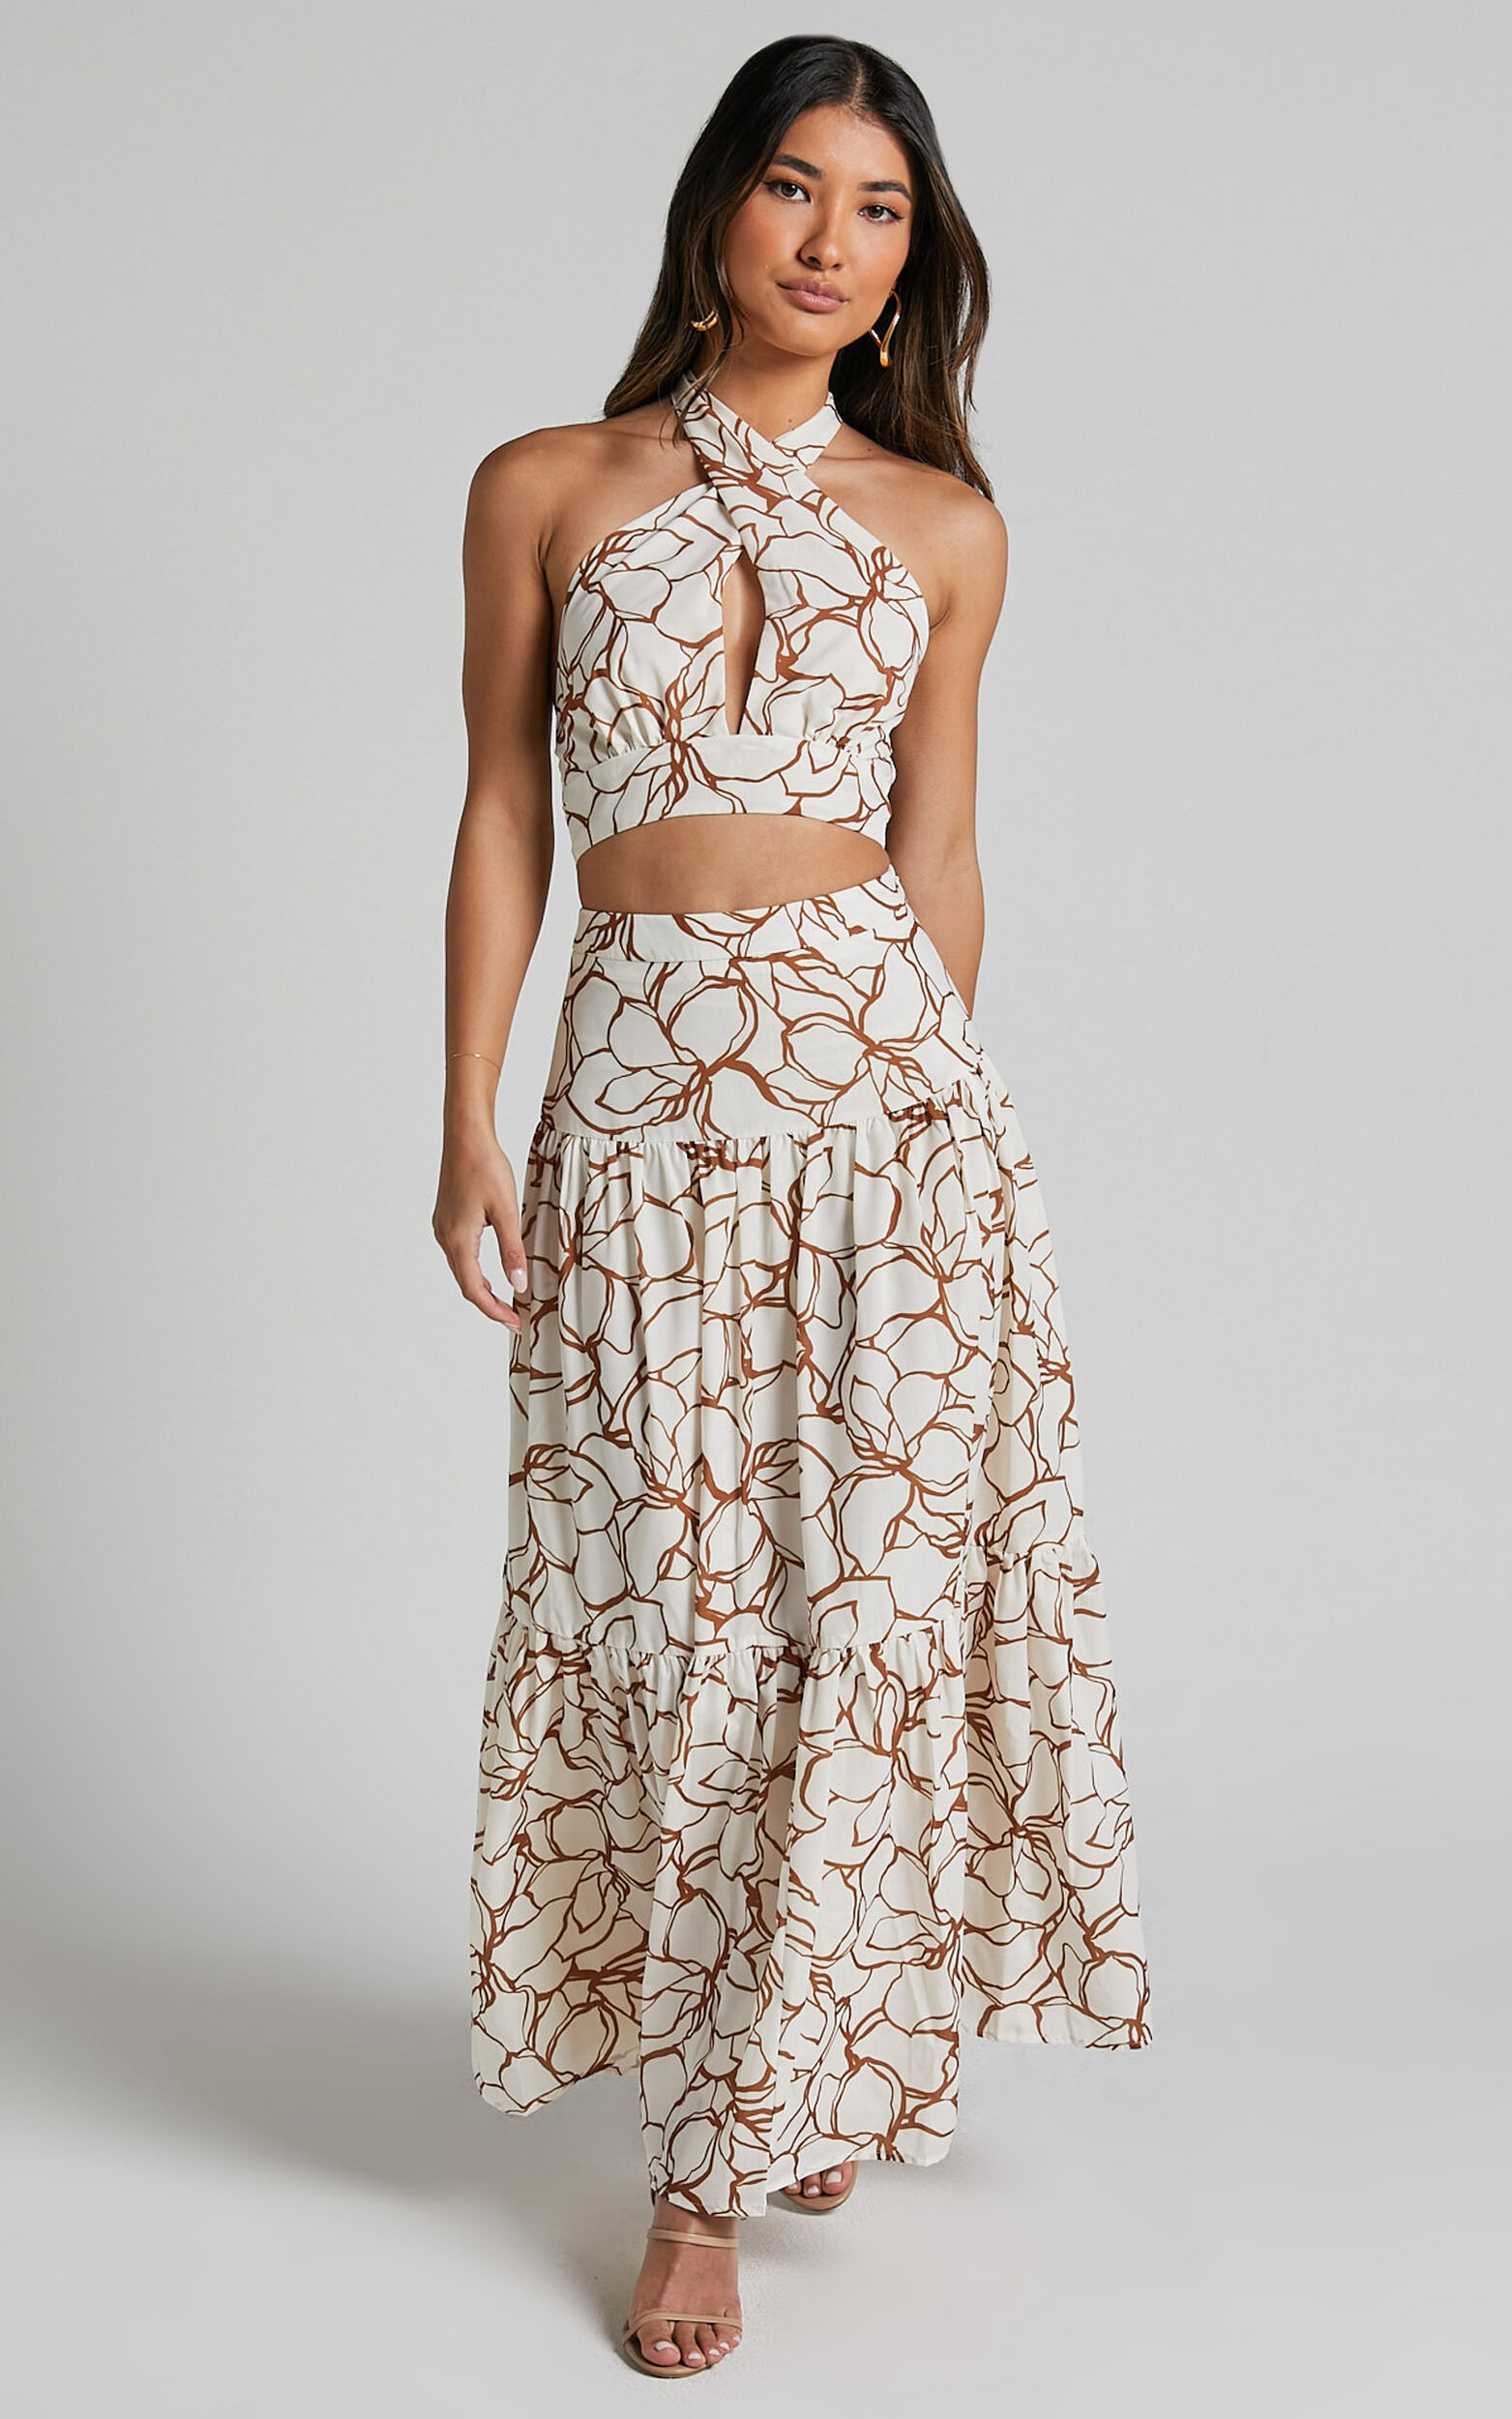 Breonna Two Piece Set - Cross Halter Neck Top And Tiered Midi Skirt in White Floral - 06, WHT1